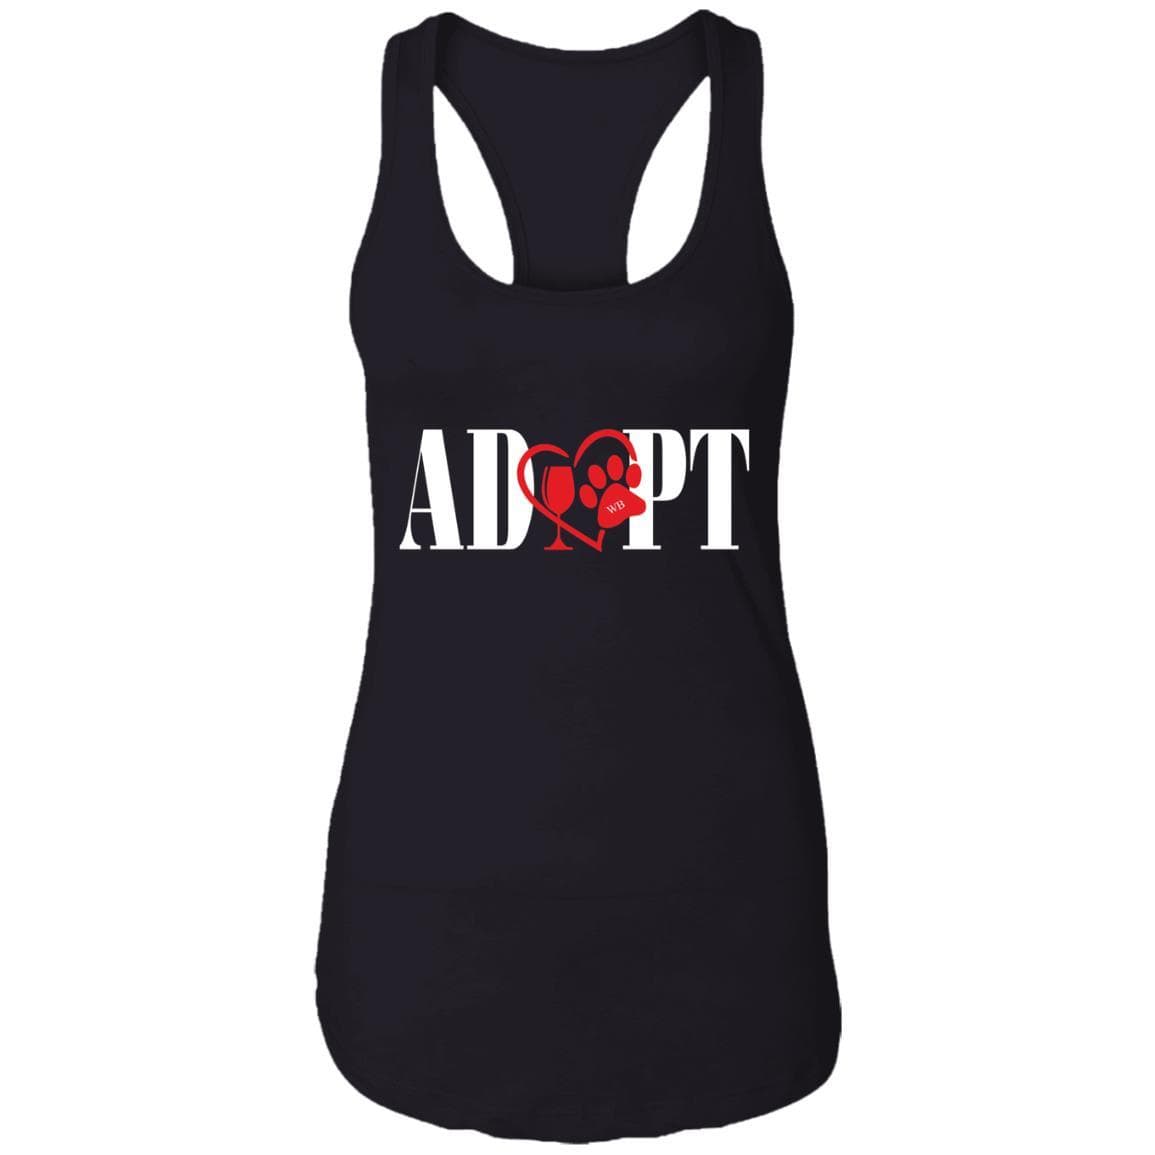 T-Shirts Black / X-Small WineyBitches.Co “Adopt” Ladies Ideal Racerback Tank-Red Heart - Wht Lettering WineyBitchesCo